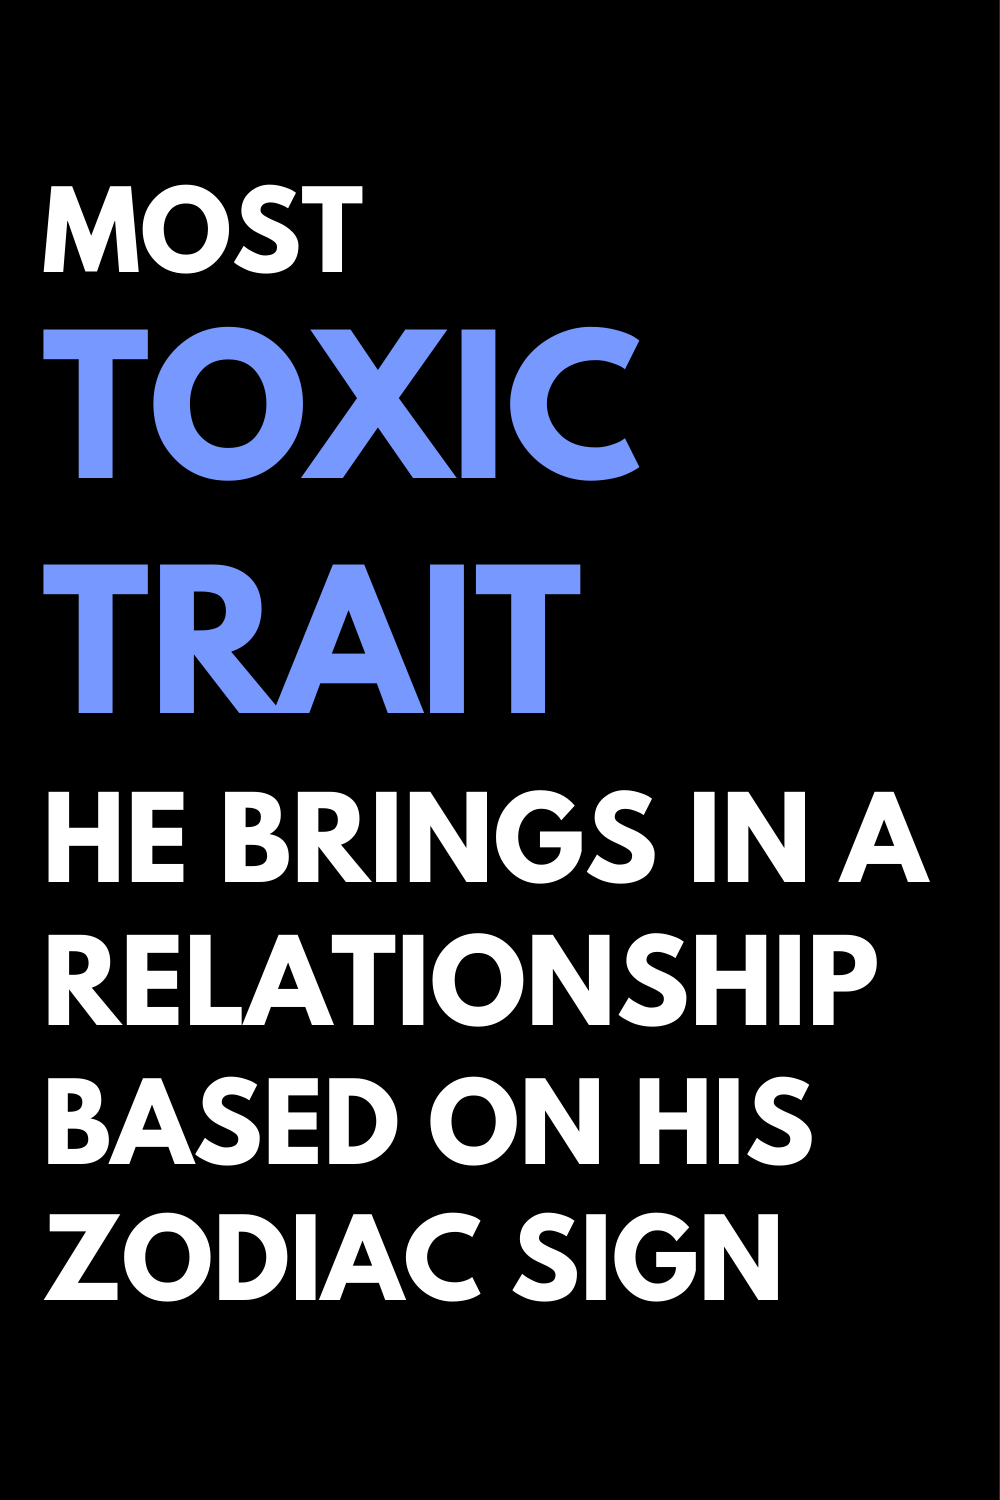 Most Toxic Trait He Brings In A Relationship Based On His Zodiac Sign